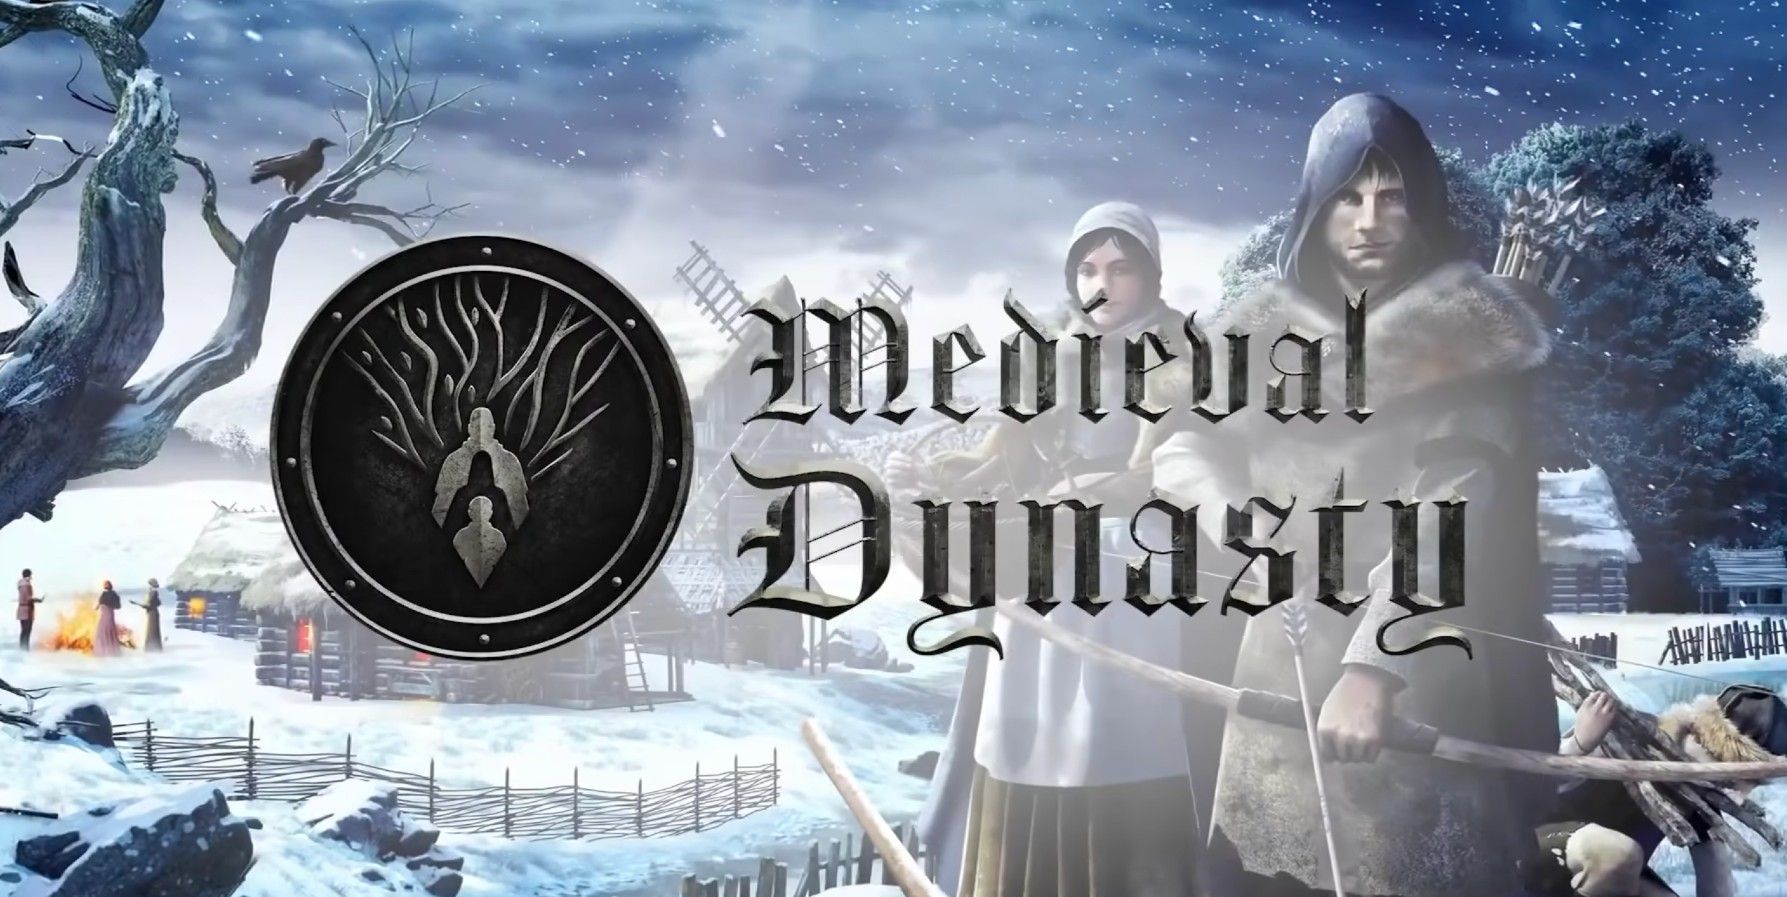 Medieval Dynasty Xbox Series X Version Coming to Game Pass